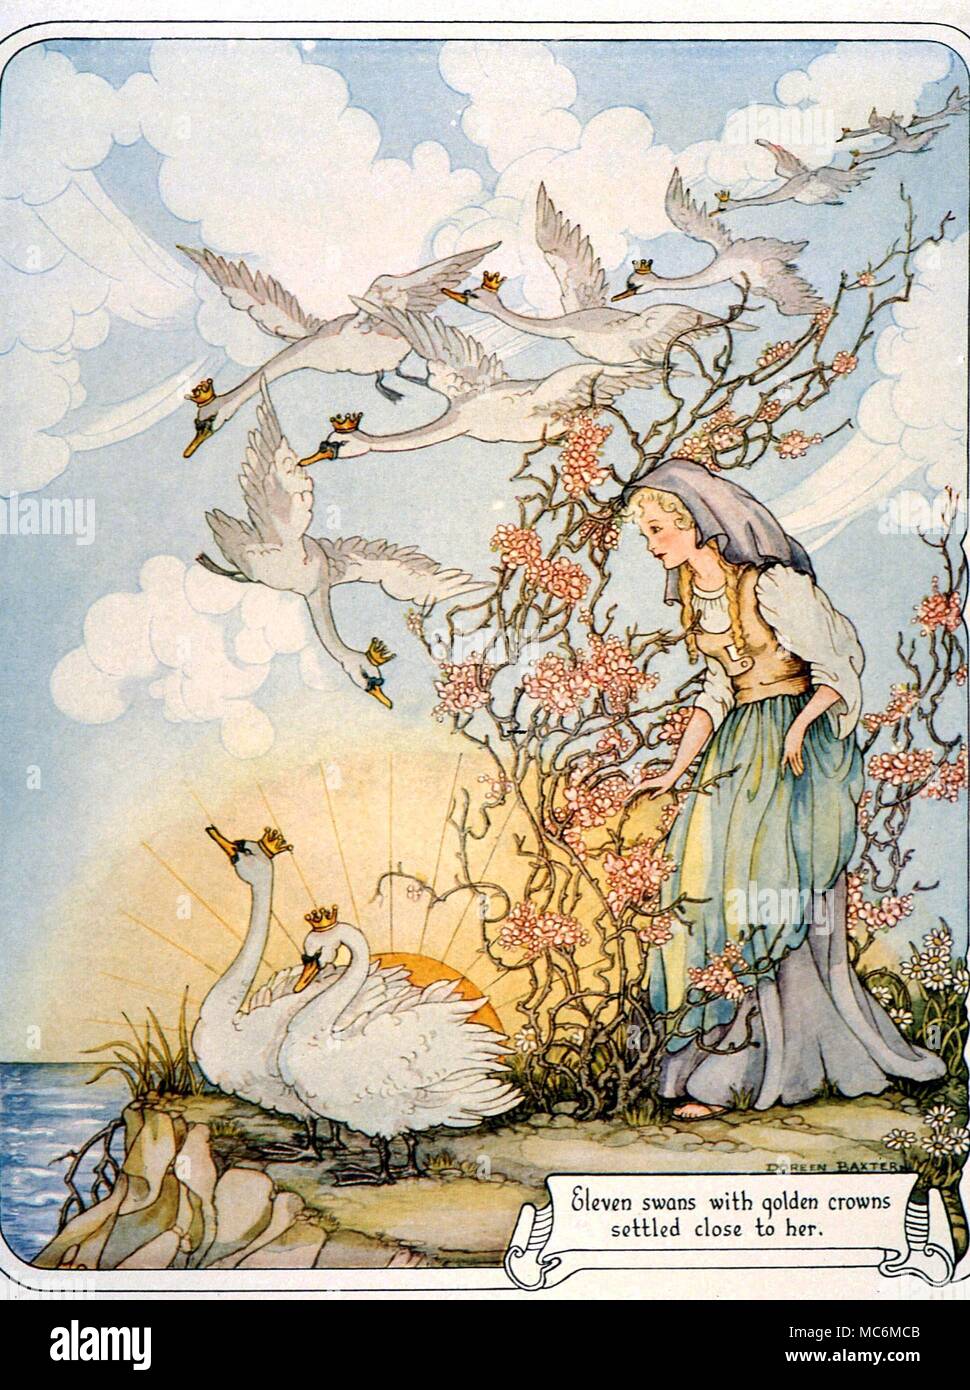 FAIRY TALES - THE WILD SWANS. The Wild Swans with golden crowns settle close to the maiden. Illustration by Doreen Baxter, from The Fairy-Tale Omnibus, c. 1949 Stock Photo